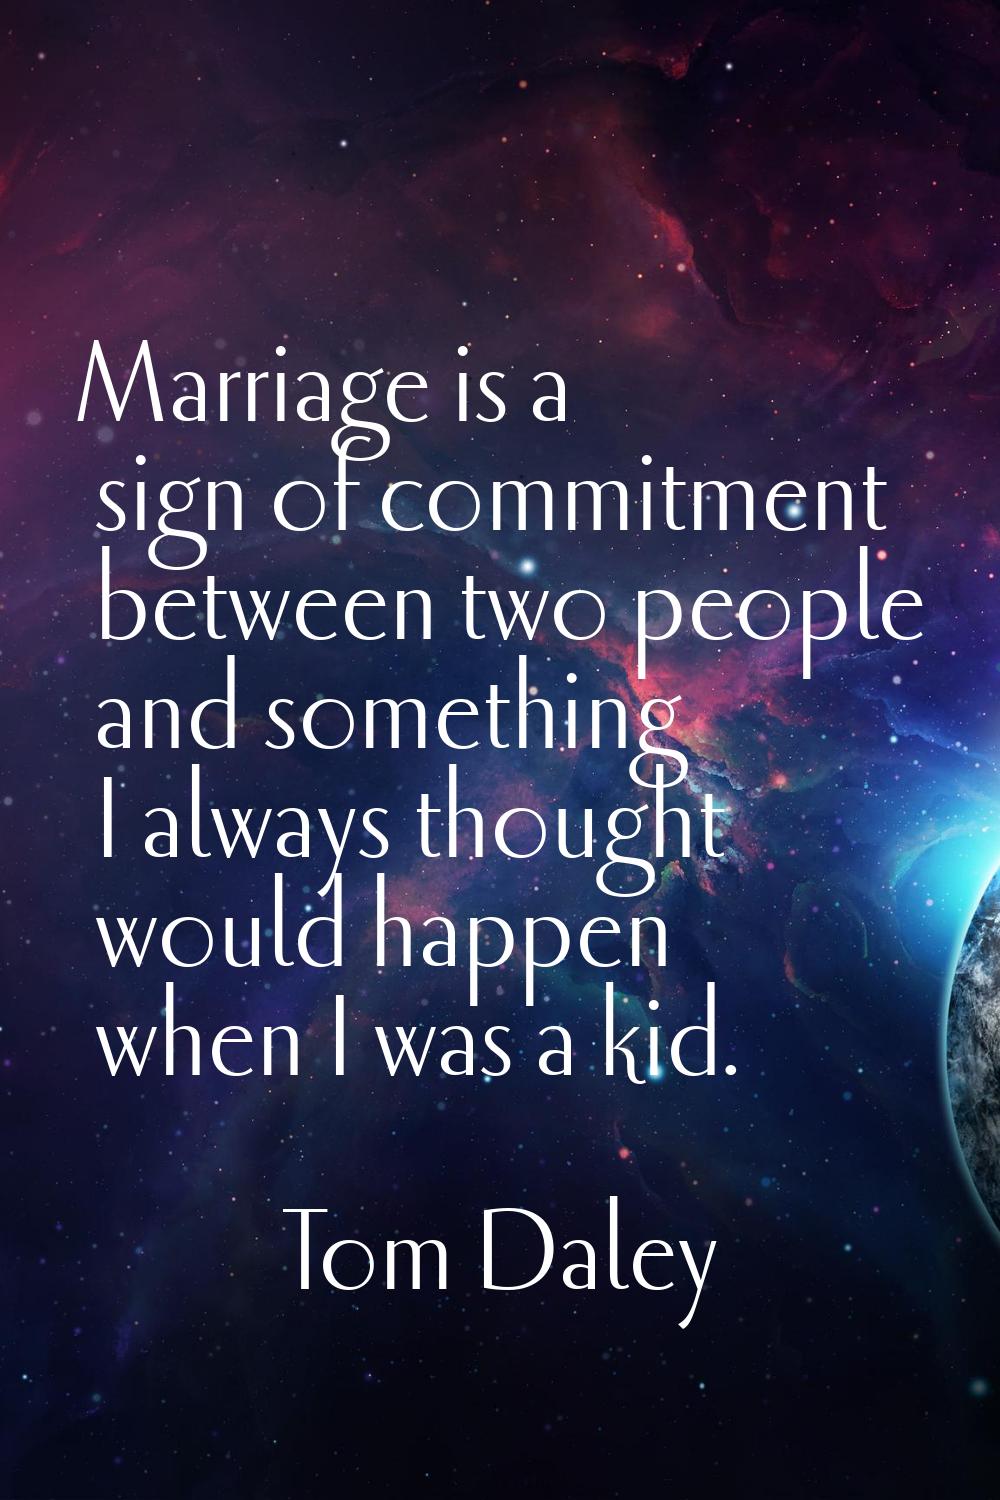 Marriage is a sign of commitment between two people and something I always thought would happen whe